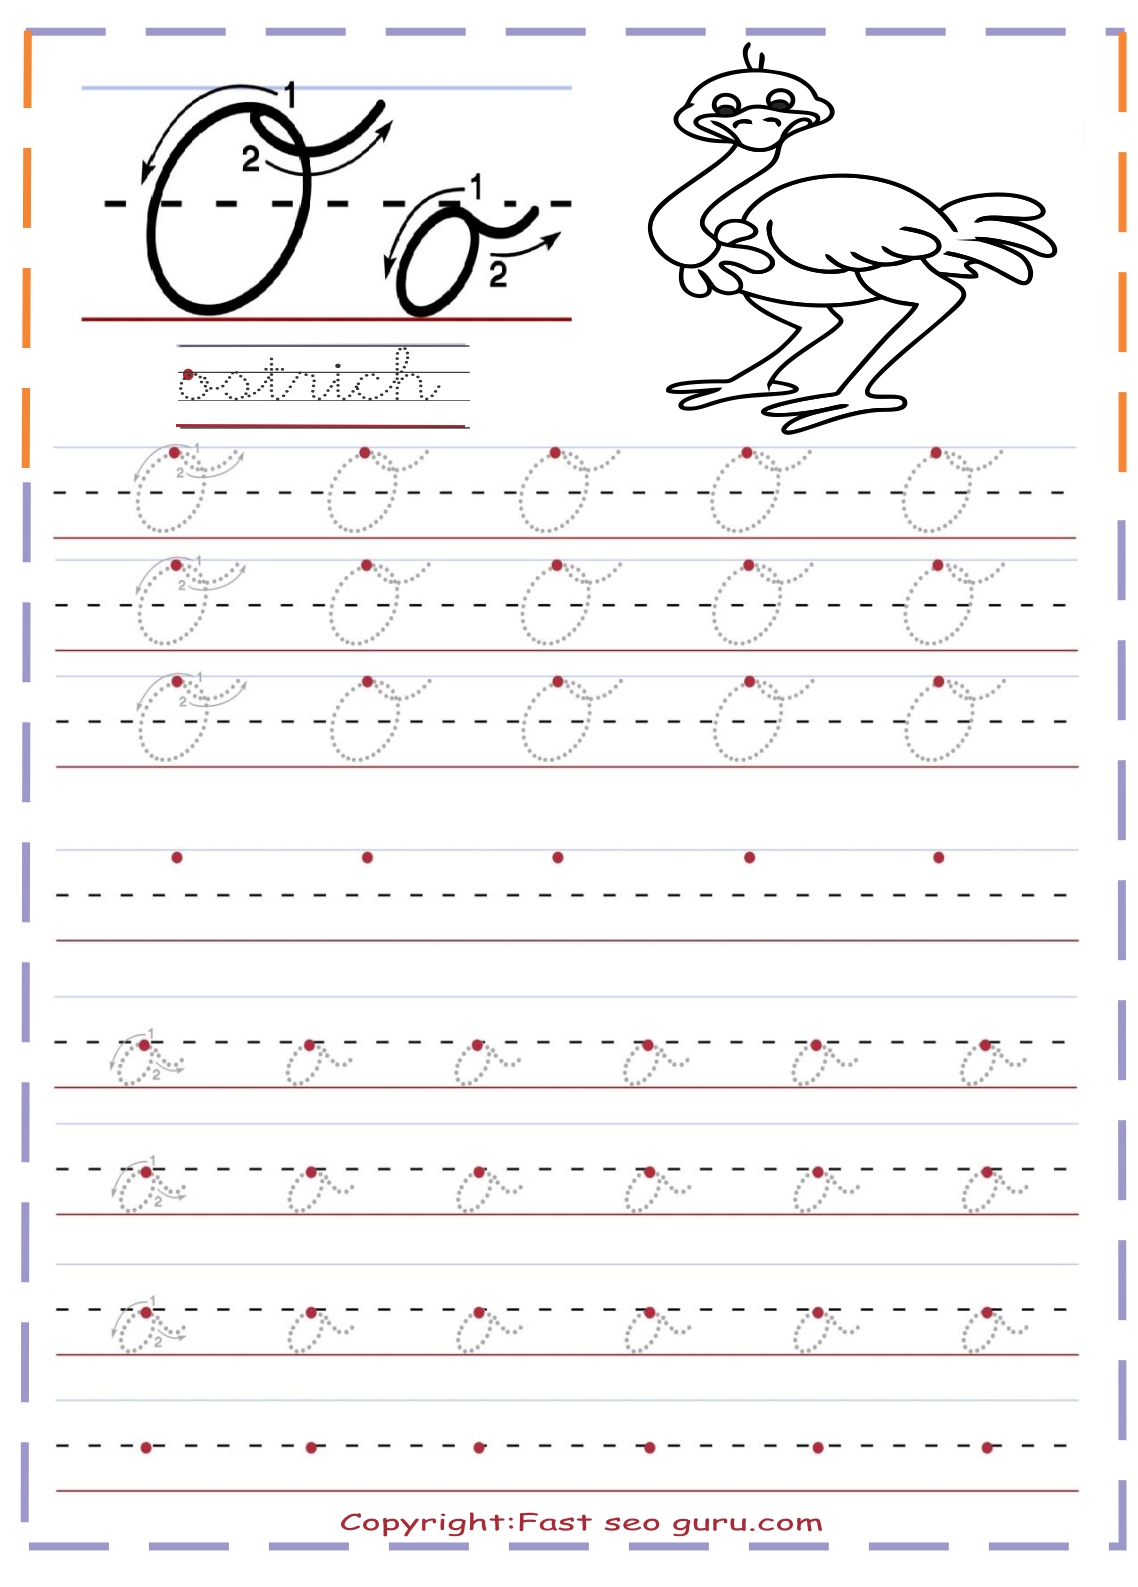 cursive handwriting tracing worksheets letter o for ostrich